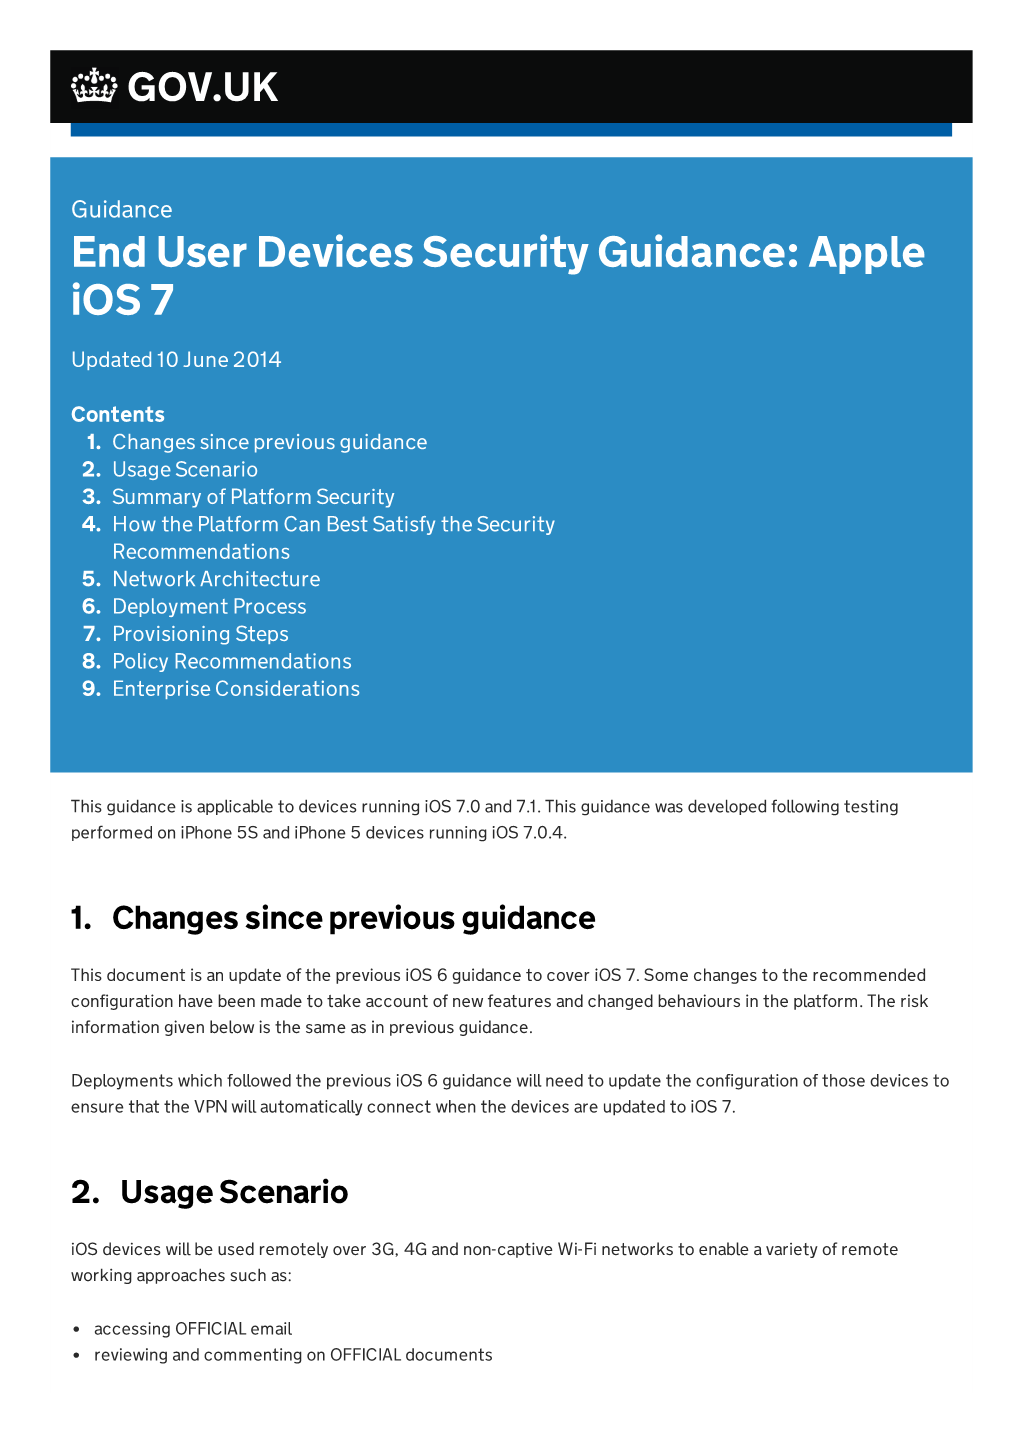 End User Devices Security Guidance: Apple Ios 7 Updated 10 June 2014